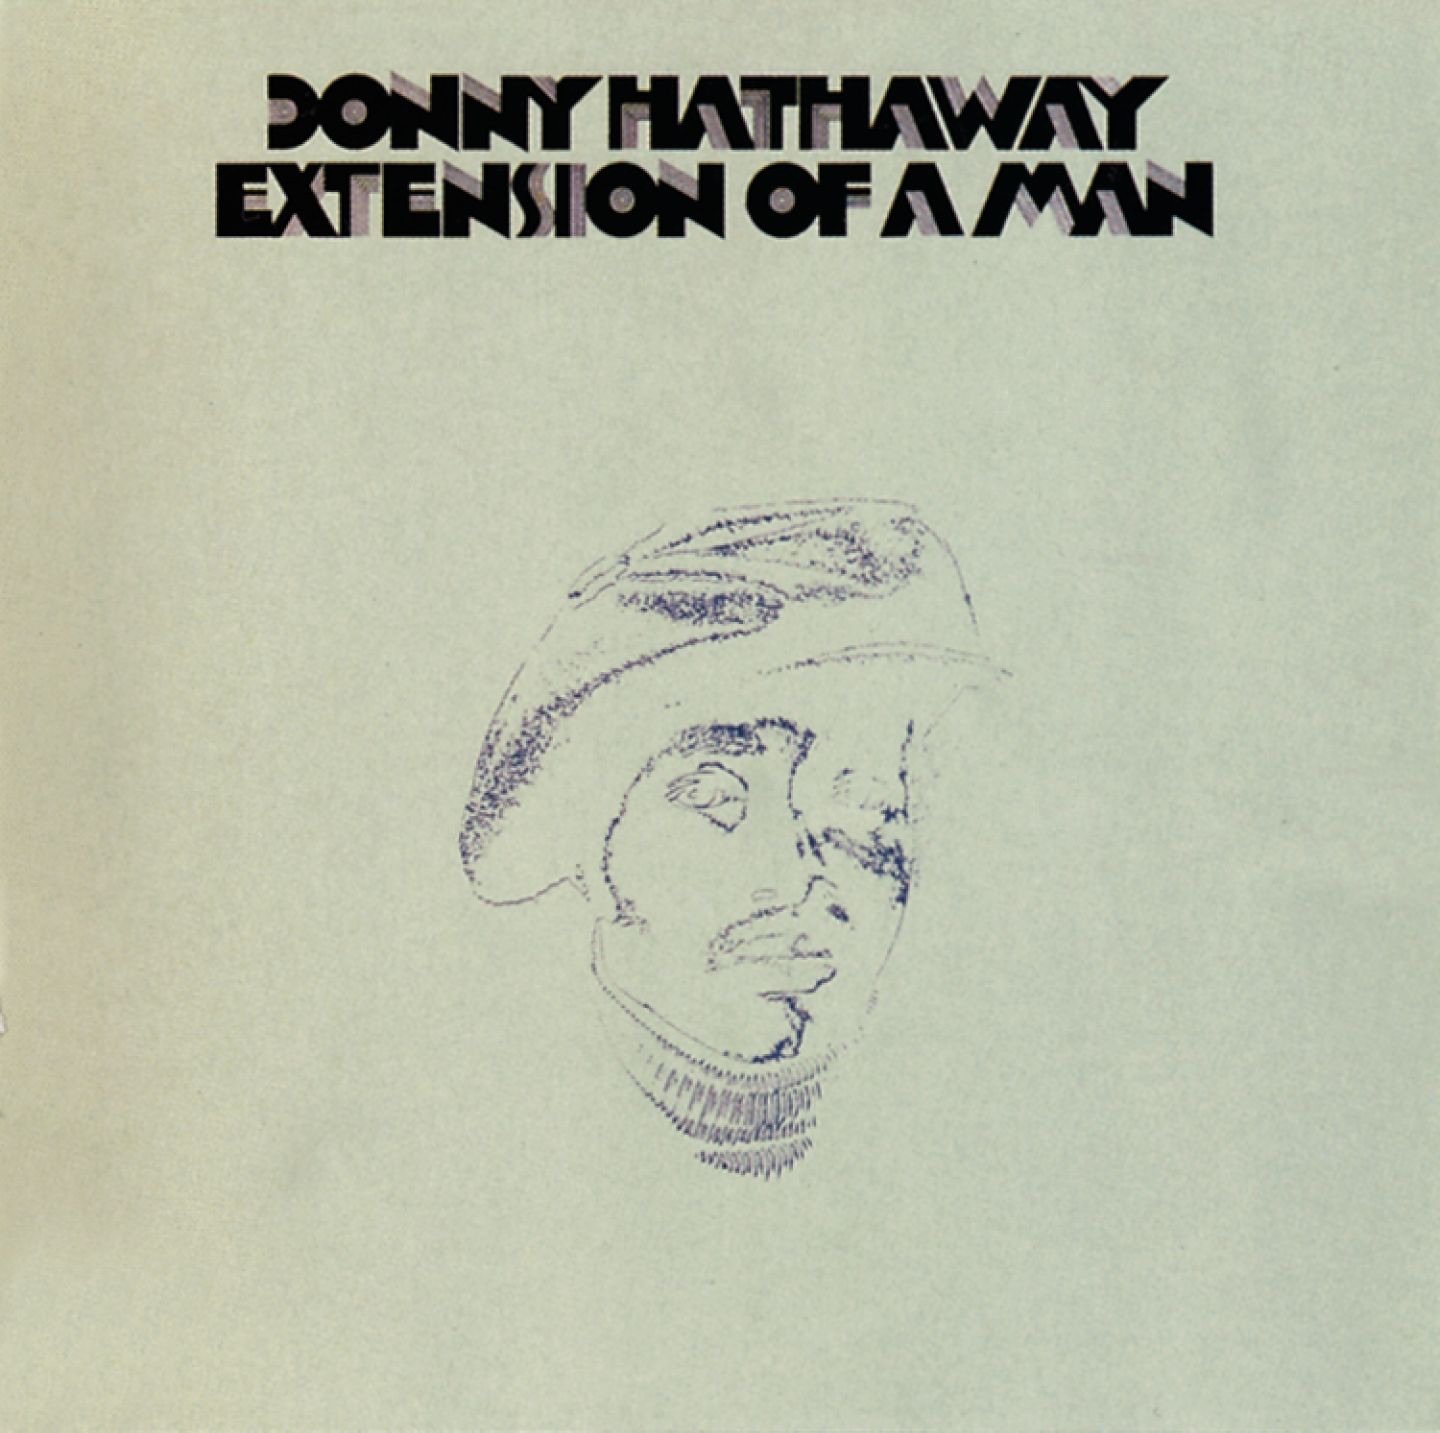 Donny Hathaway - Valdez In the Country POSmusic background music streaming platform medical practice music playlists 